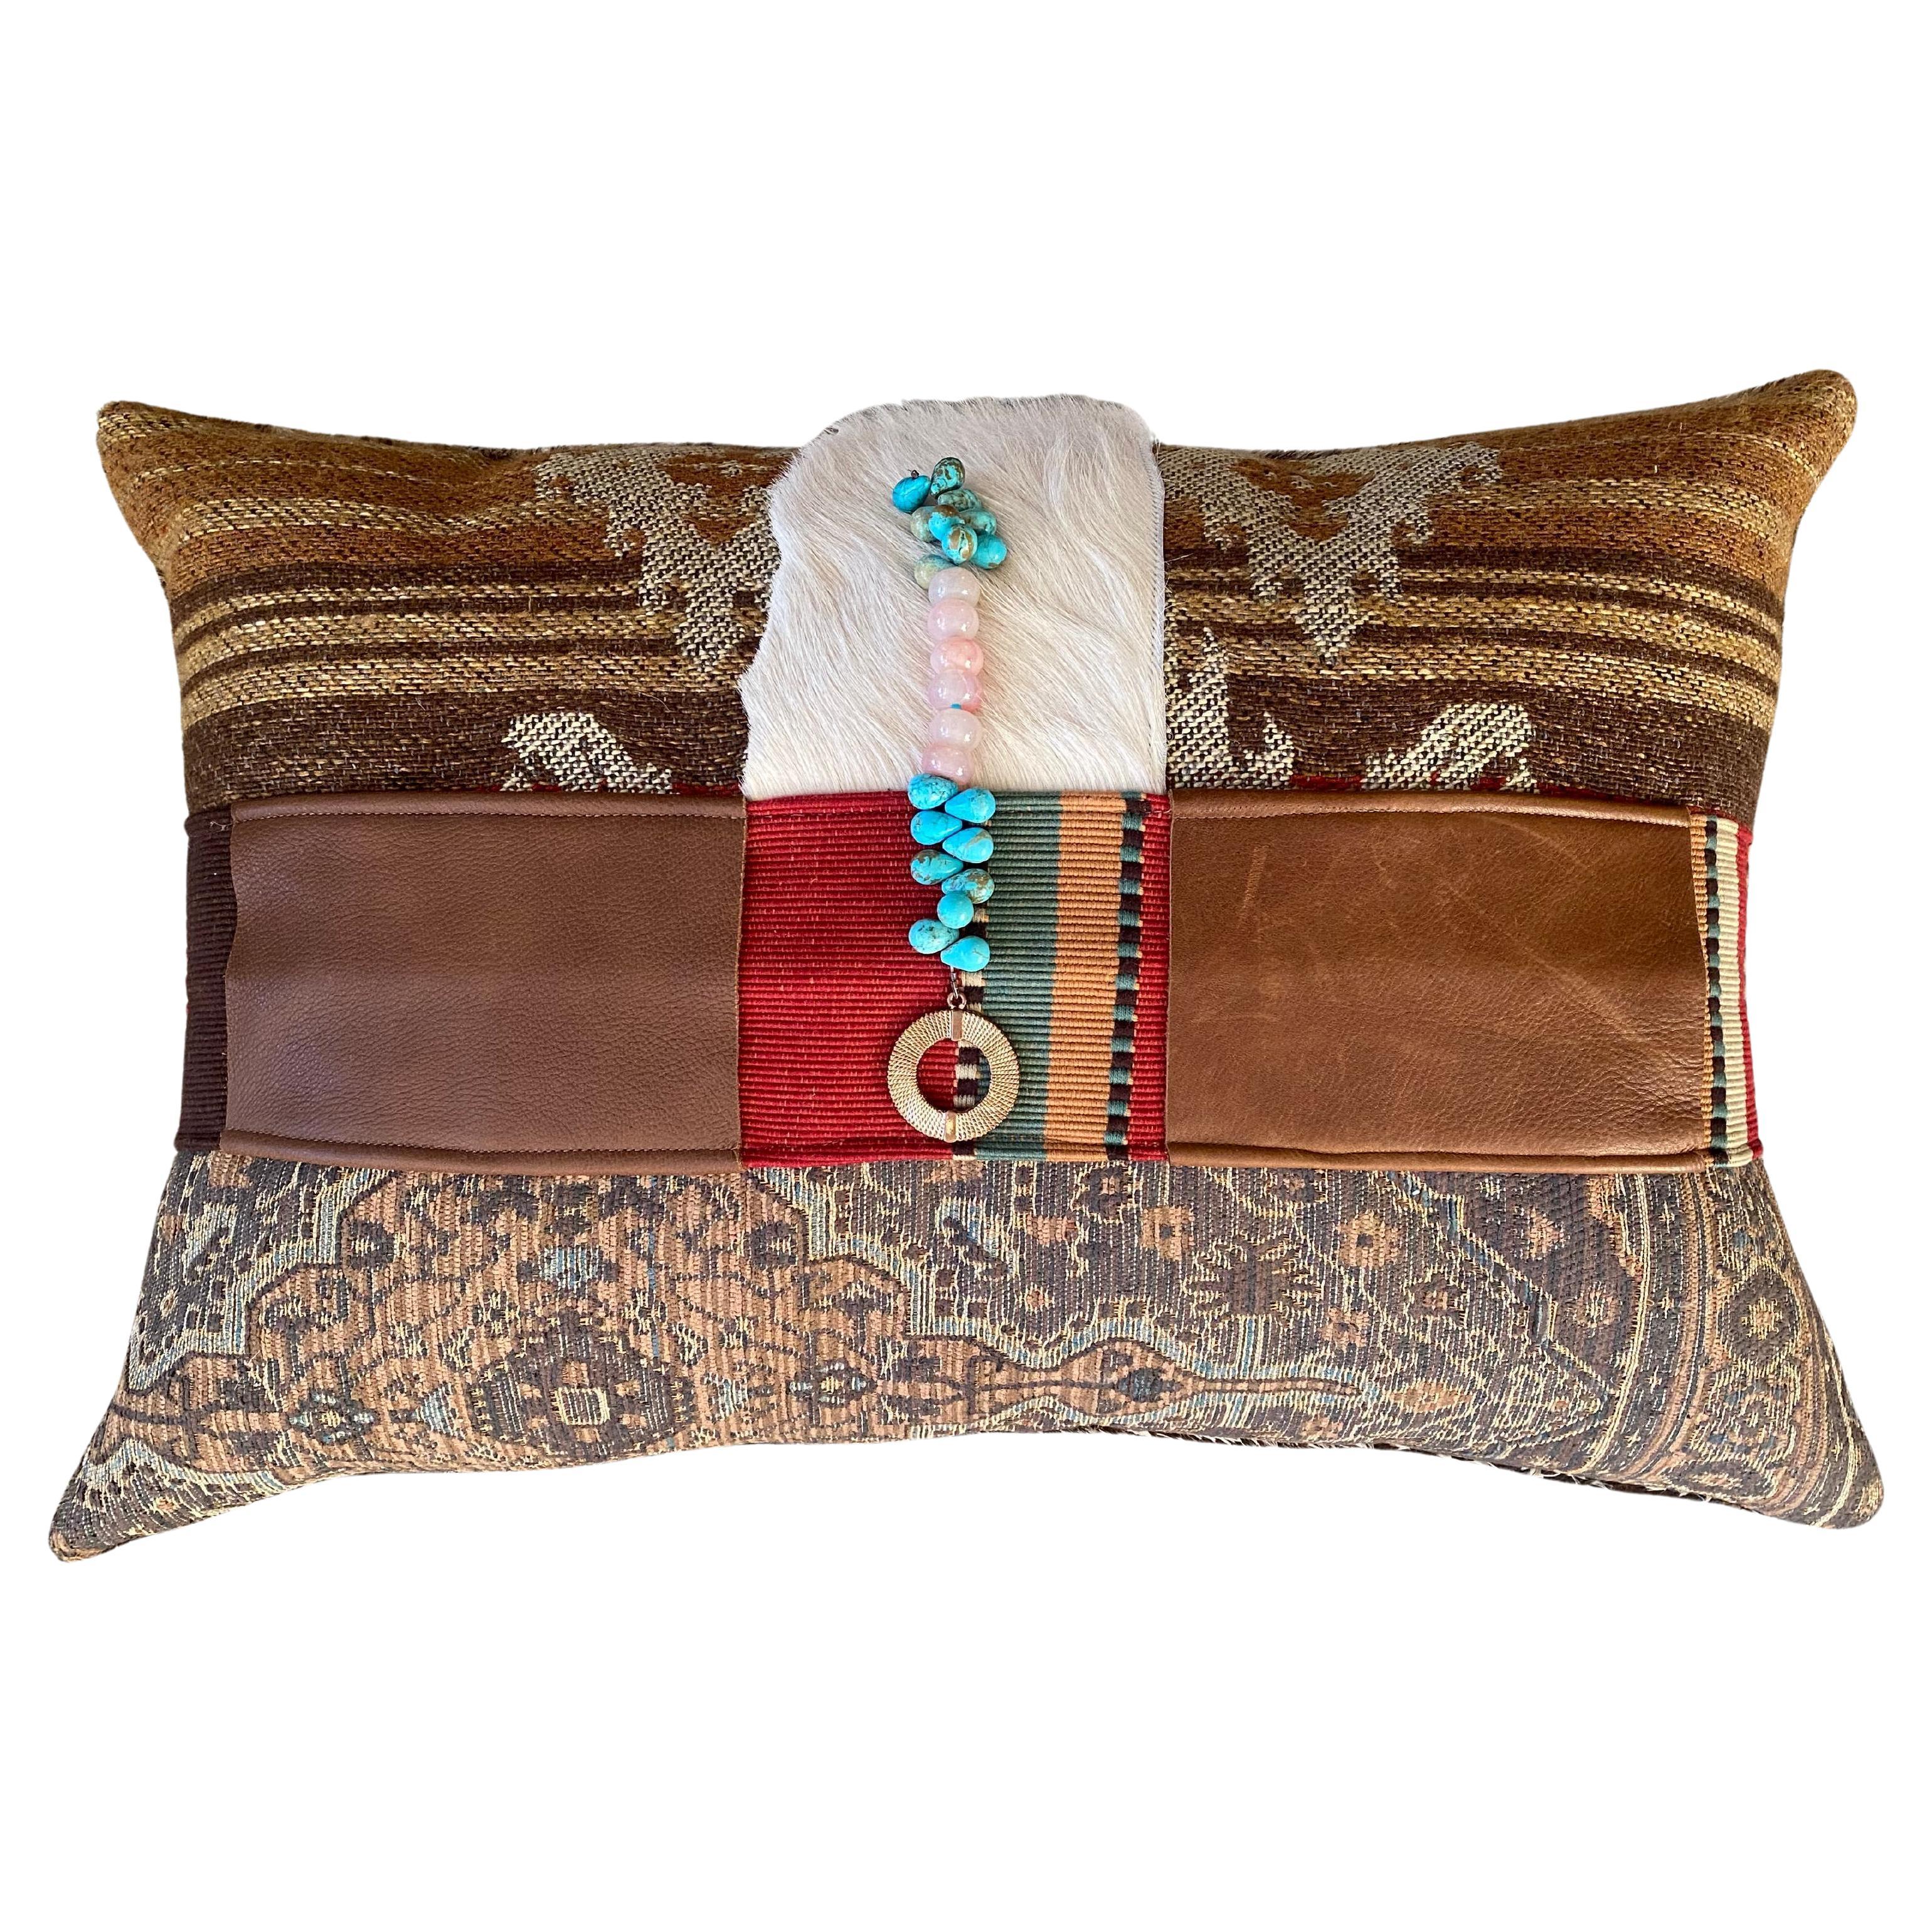 Mountain Inspired Lumbar Pillow with Turquoise Accent and Porcupine Back For Sale